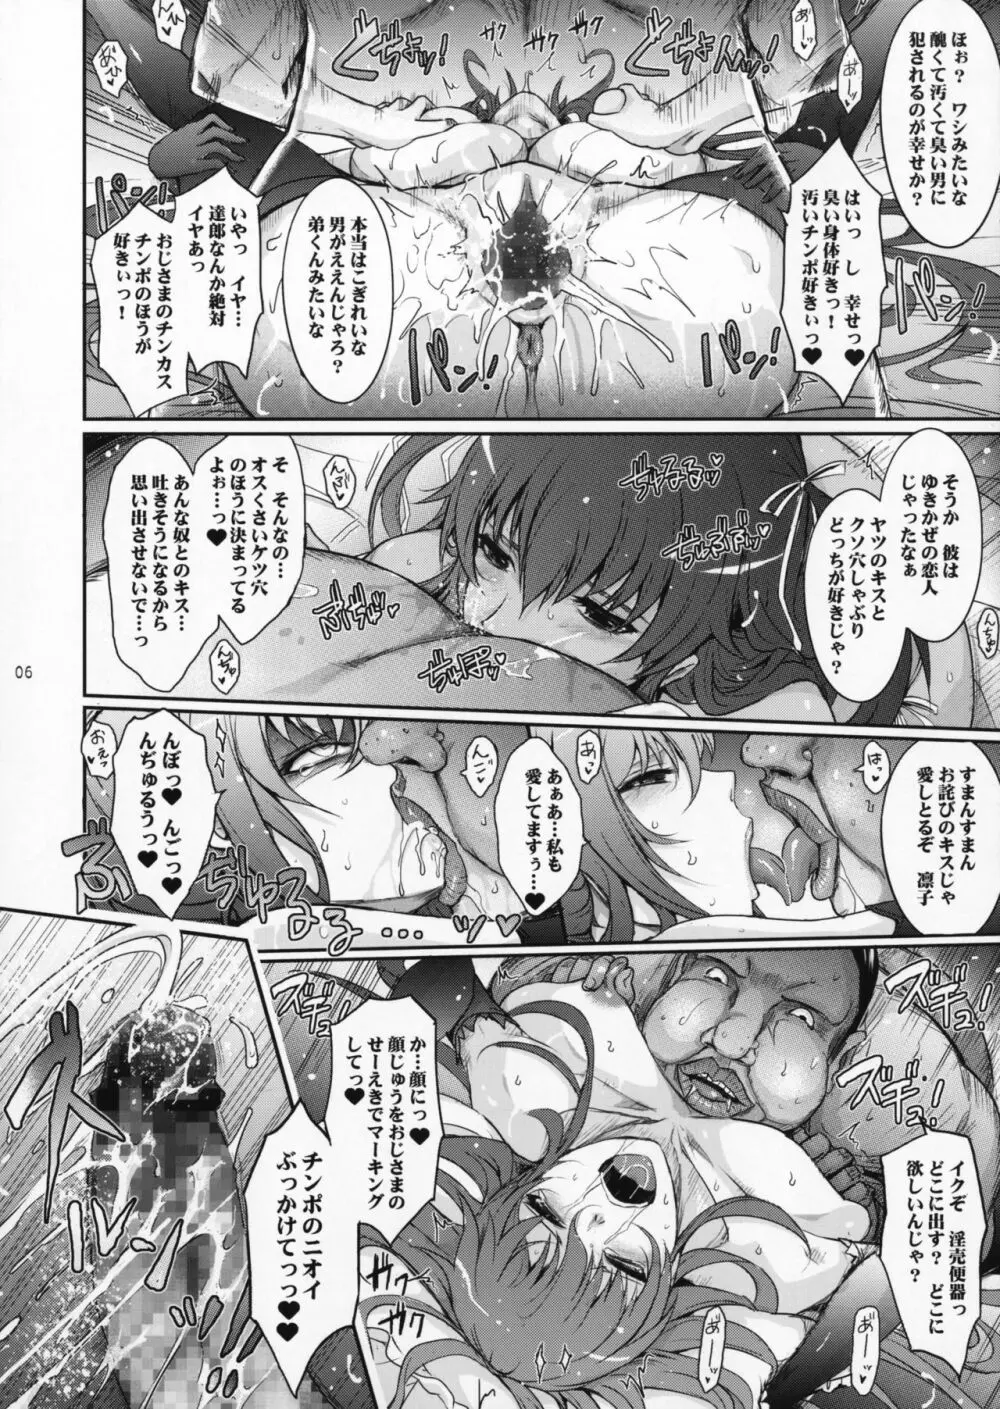 TENTACLES 隷嬢秋山凛子の蜜箱 Page.5